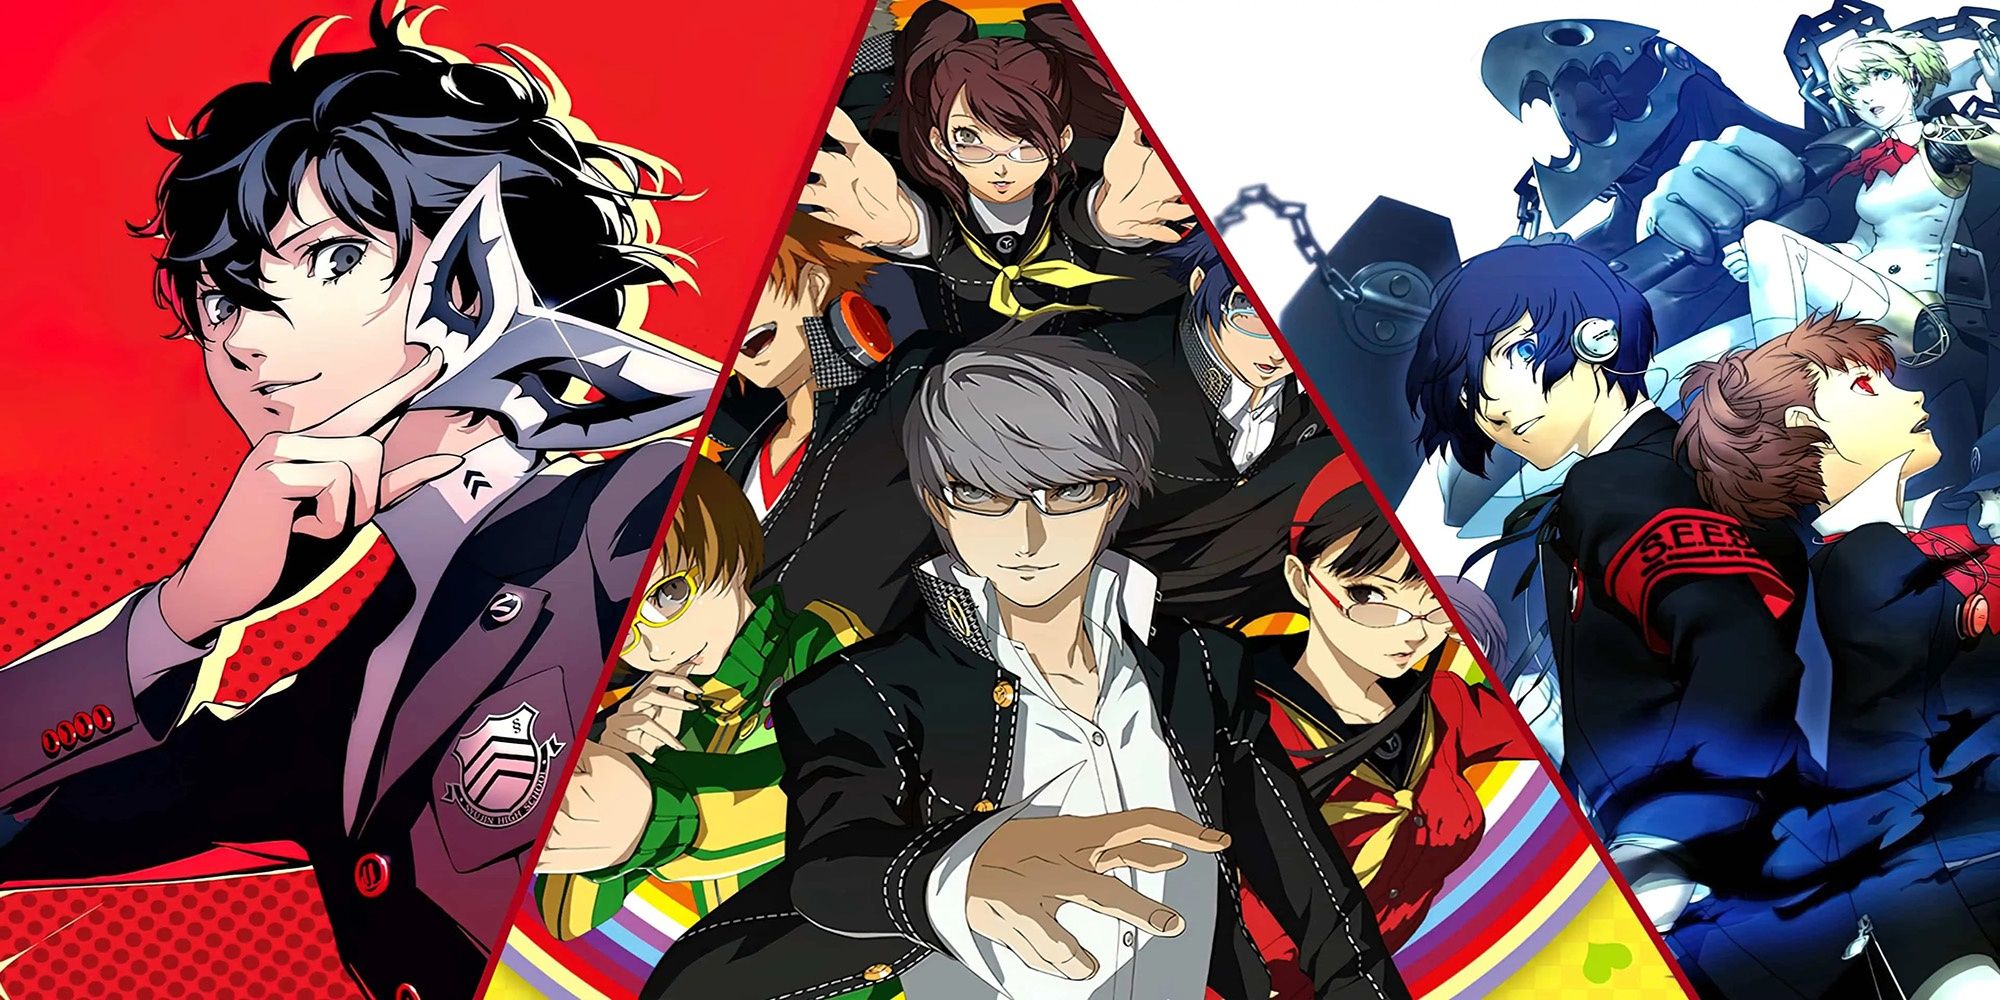 Key Art Of The Heroes From The Higly Acclaimed Games; Persona 3 Portable, Persona 4 Golden, And Persona 5 Royal